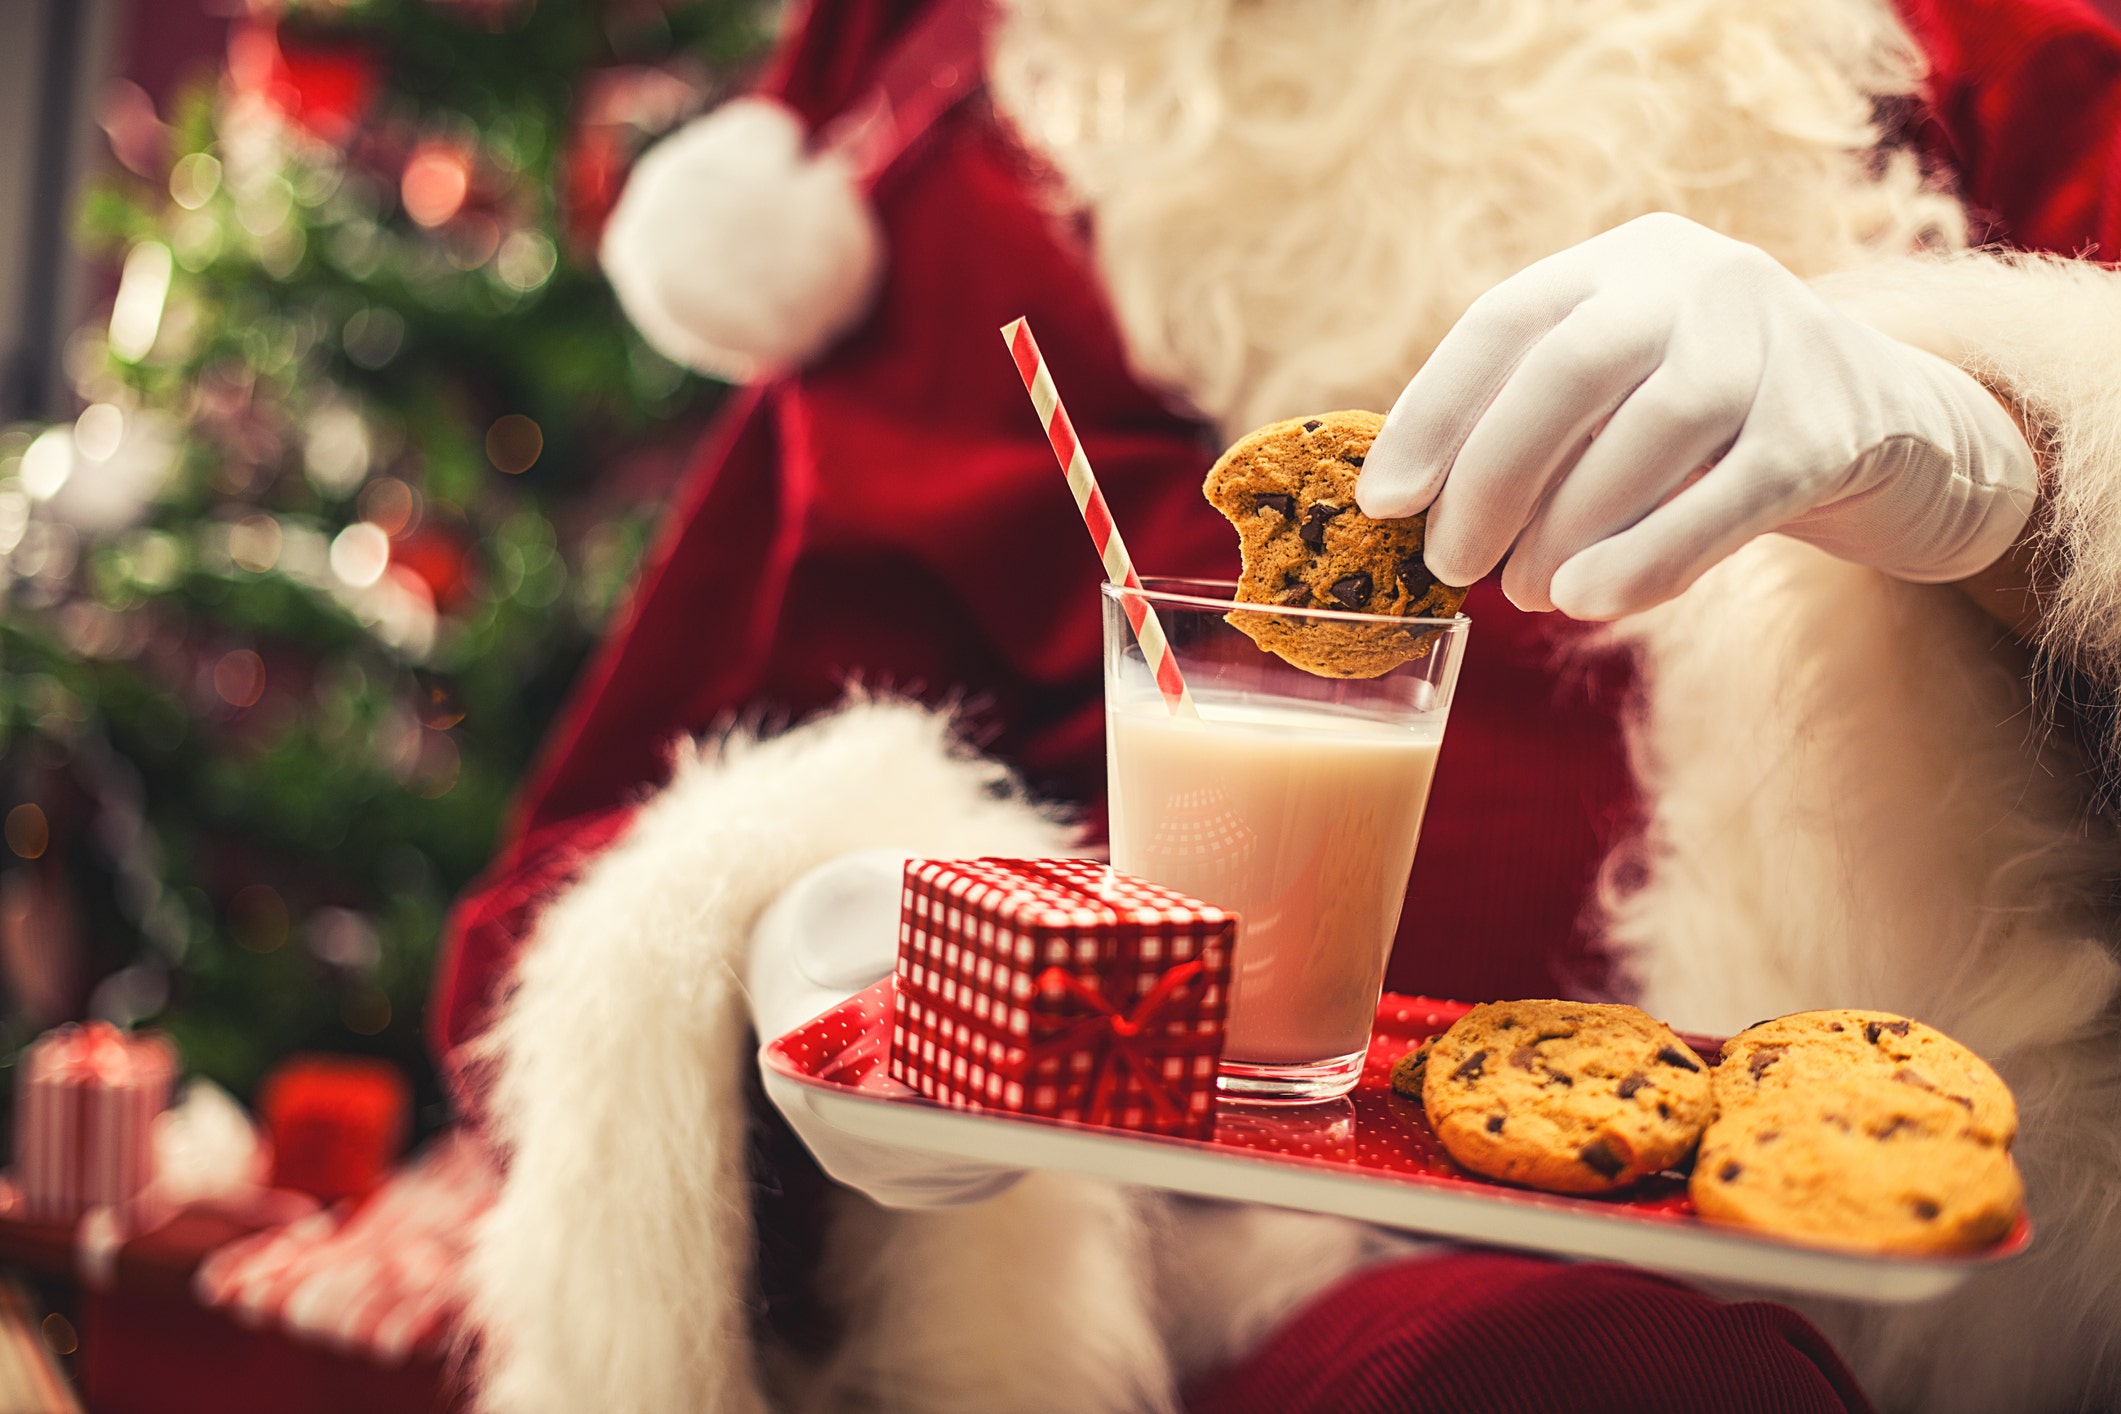 What's the story with Christmas cookies? Why do we leave cookies for Santa?